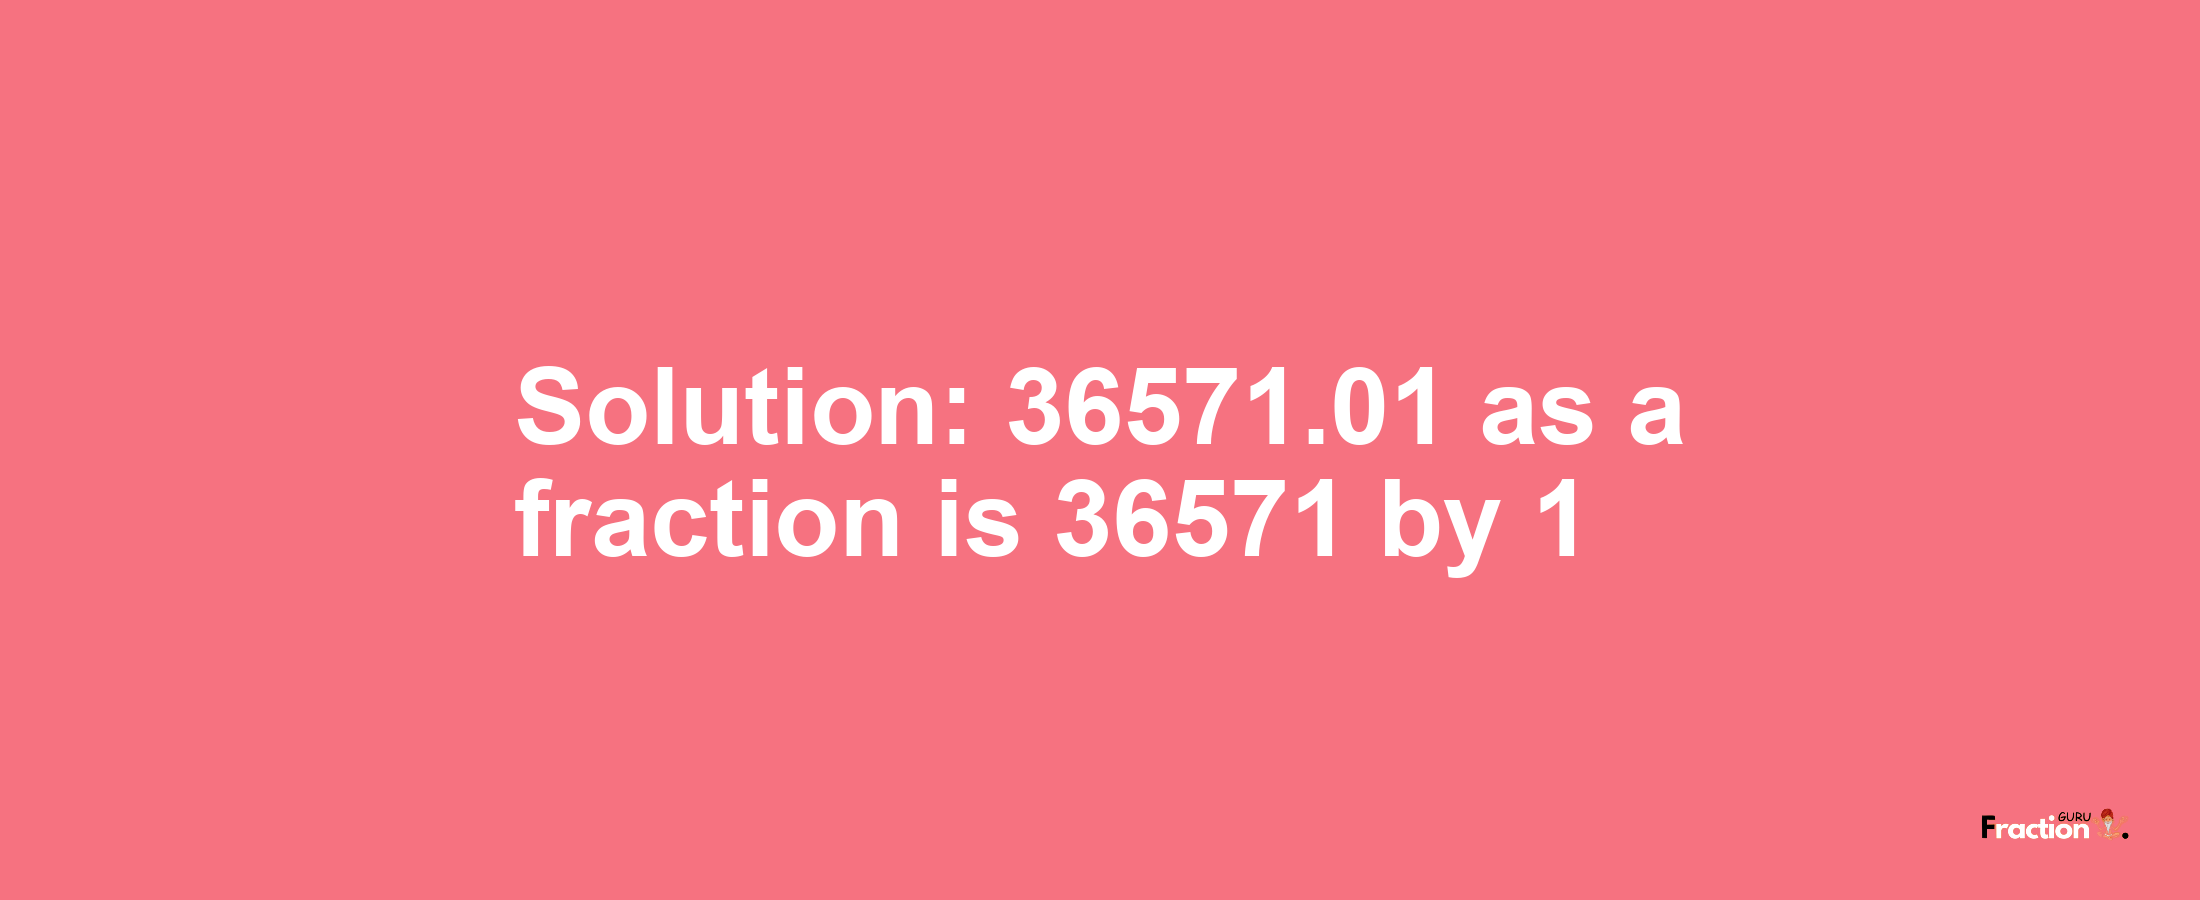 Solution:36571.01 as a fraction is 36571/1